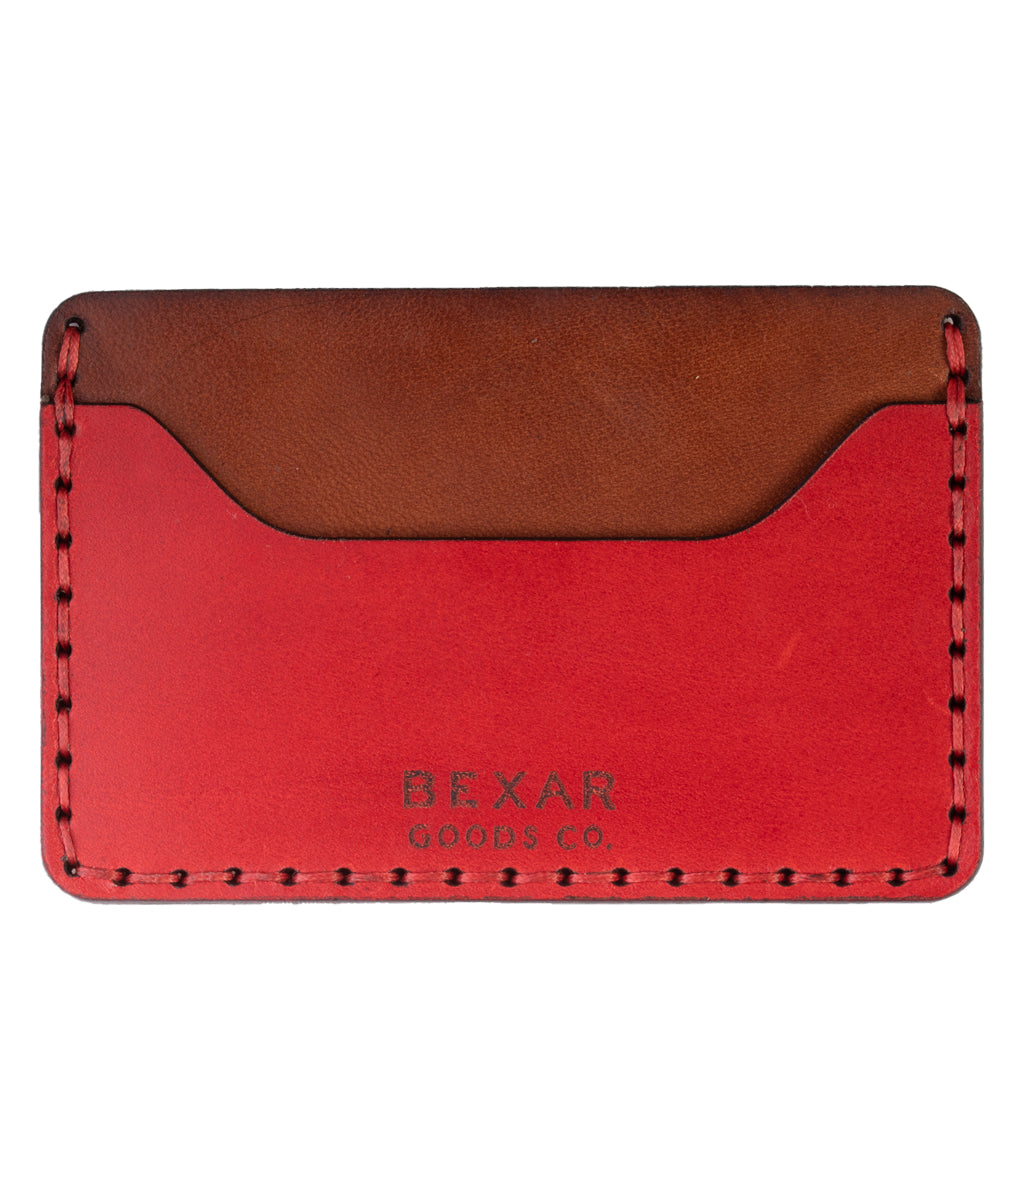 two pocket leather wallet with center divider shown in red and brown leather 